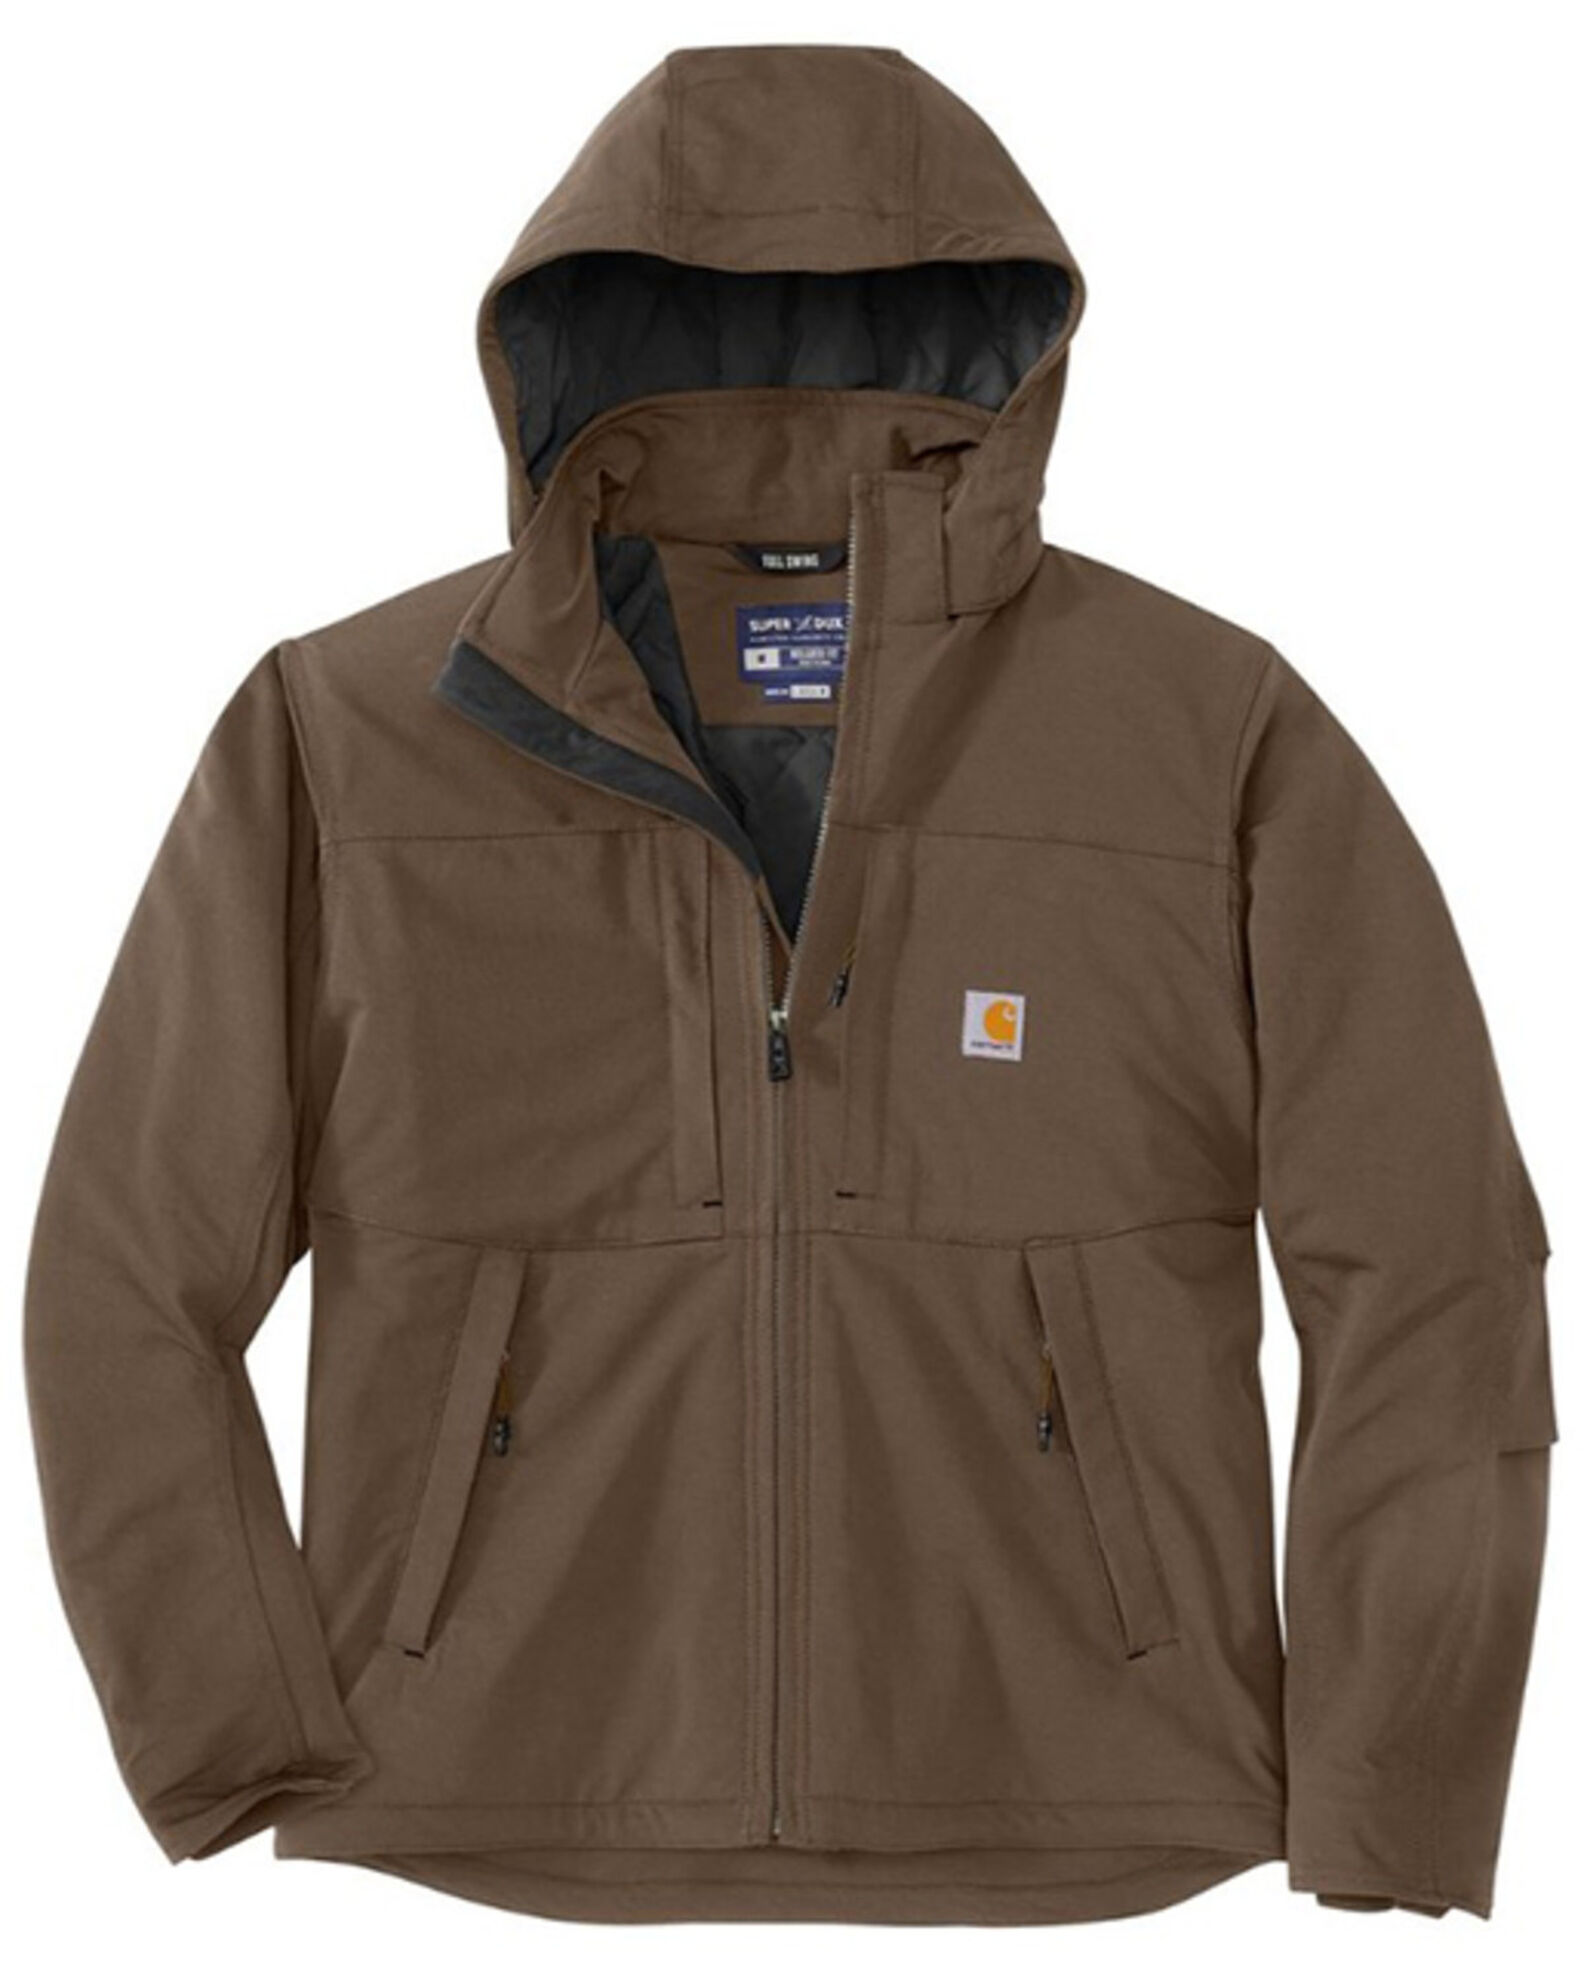 Product Name: Carhartt Men's Super Dux™ Insulated Relaxed Fit Work Jacket